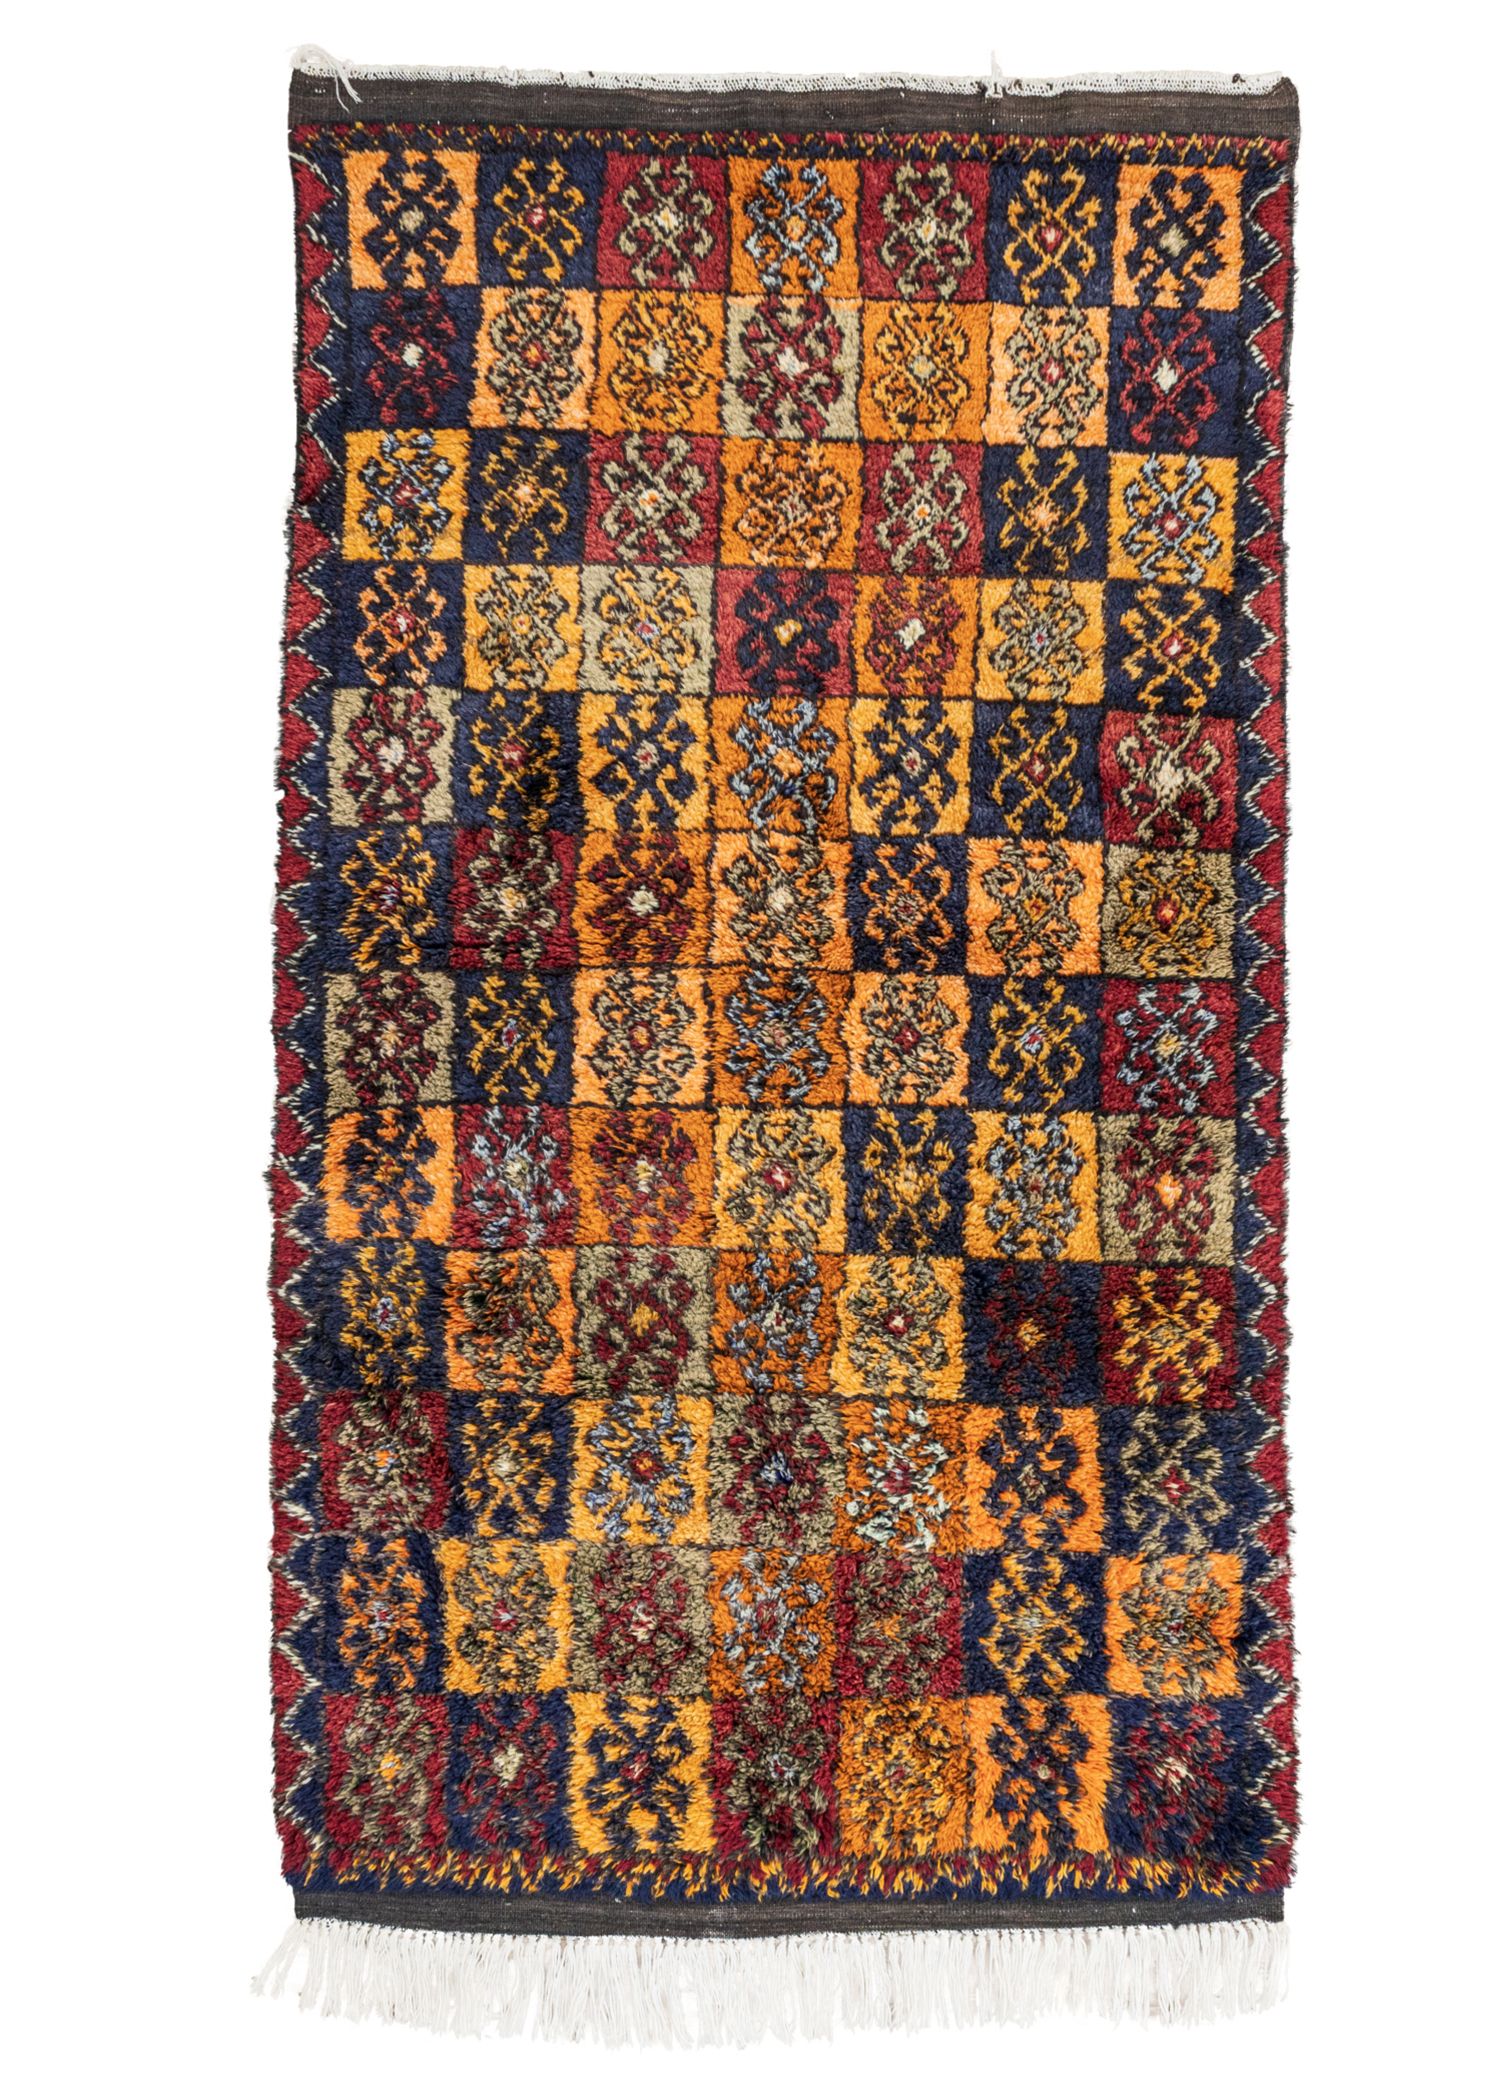 Saner Ethnic Pattern Colorful Hand-Woven Wool Rug 125x237 cm